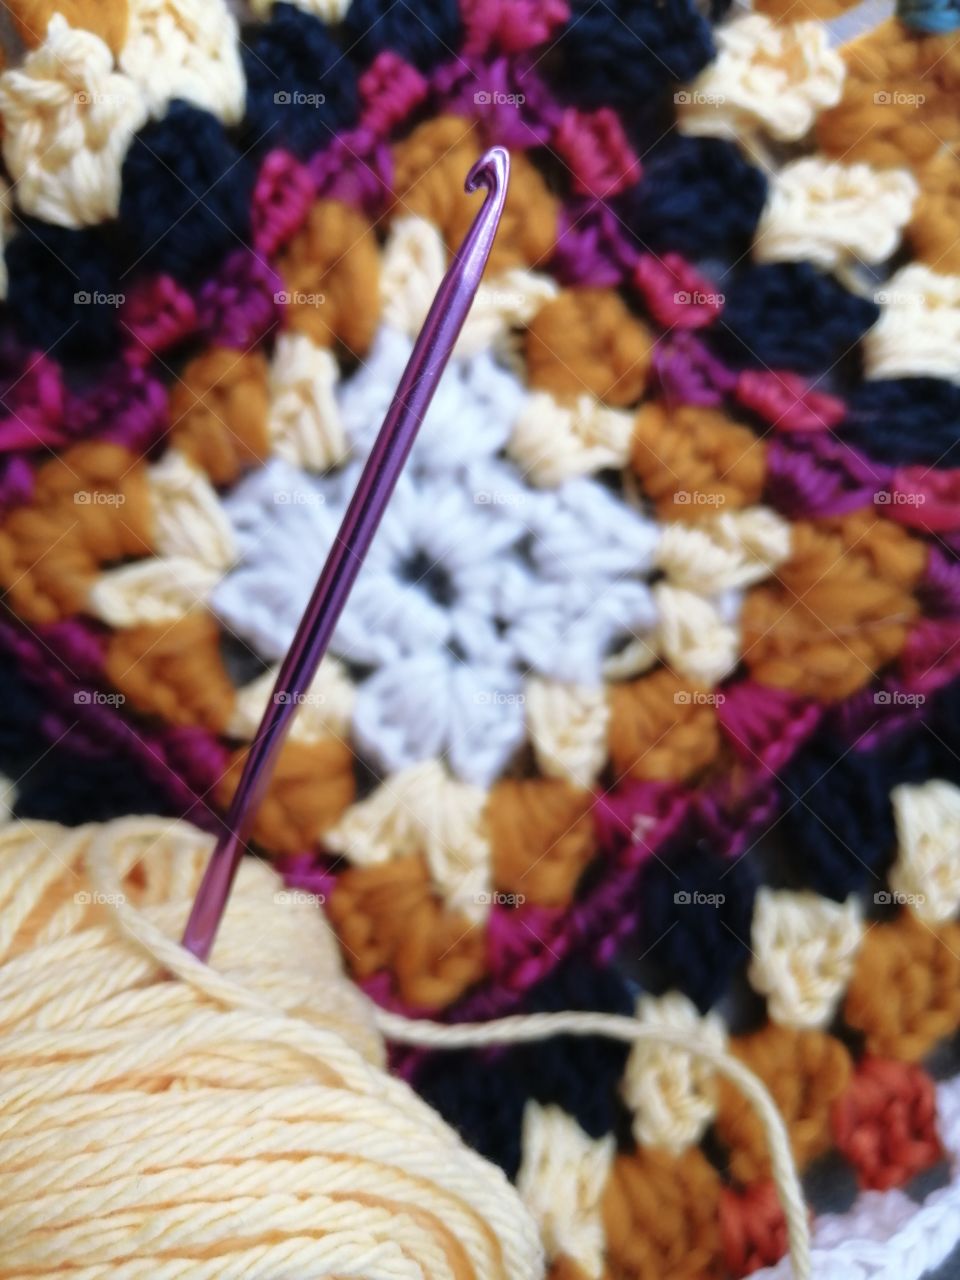 Crocheted Granny Square, a Ball of Yellow Yarn and a Hook, White, Yellow, Orange, Purple, Black,